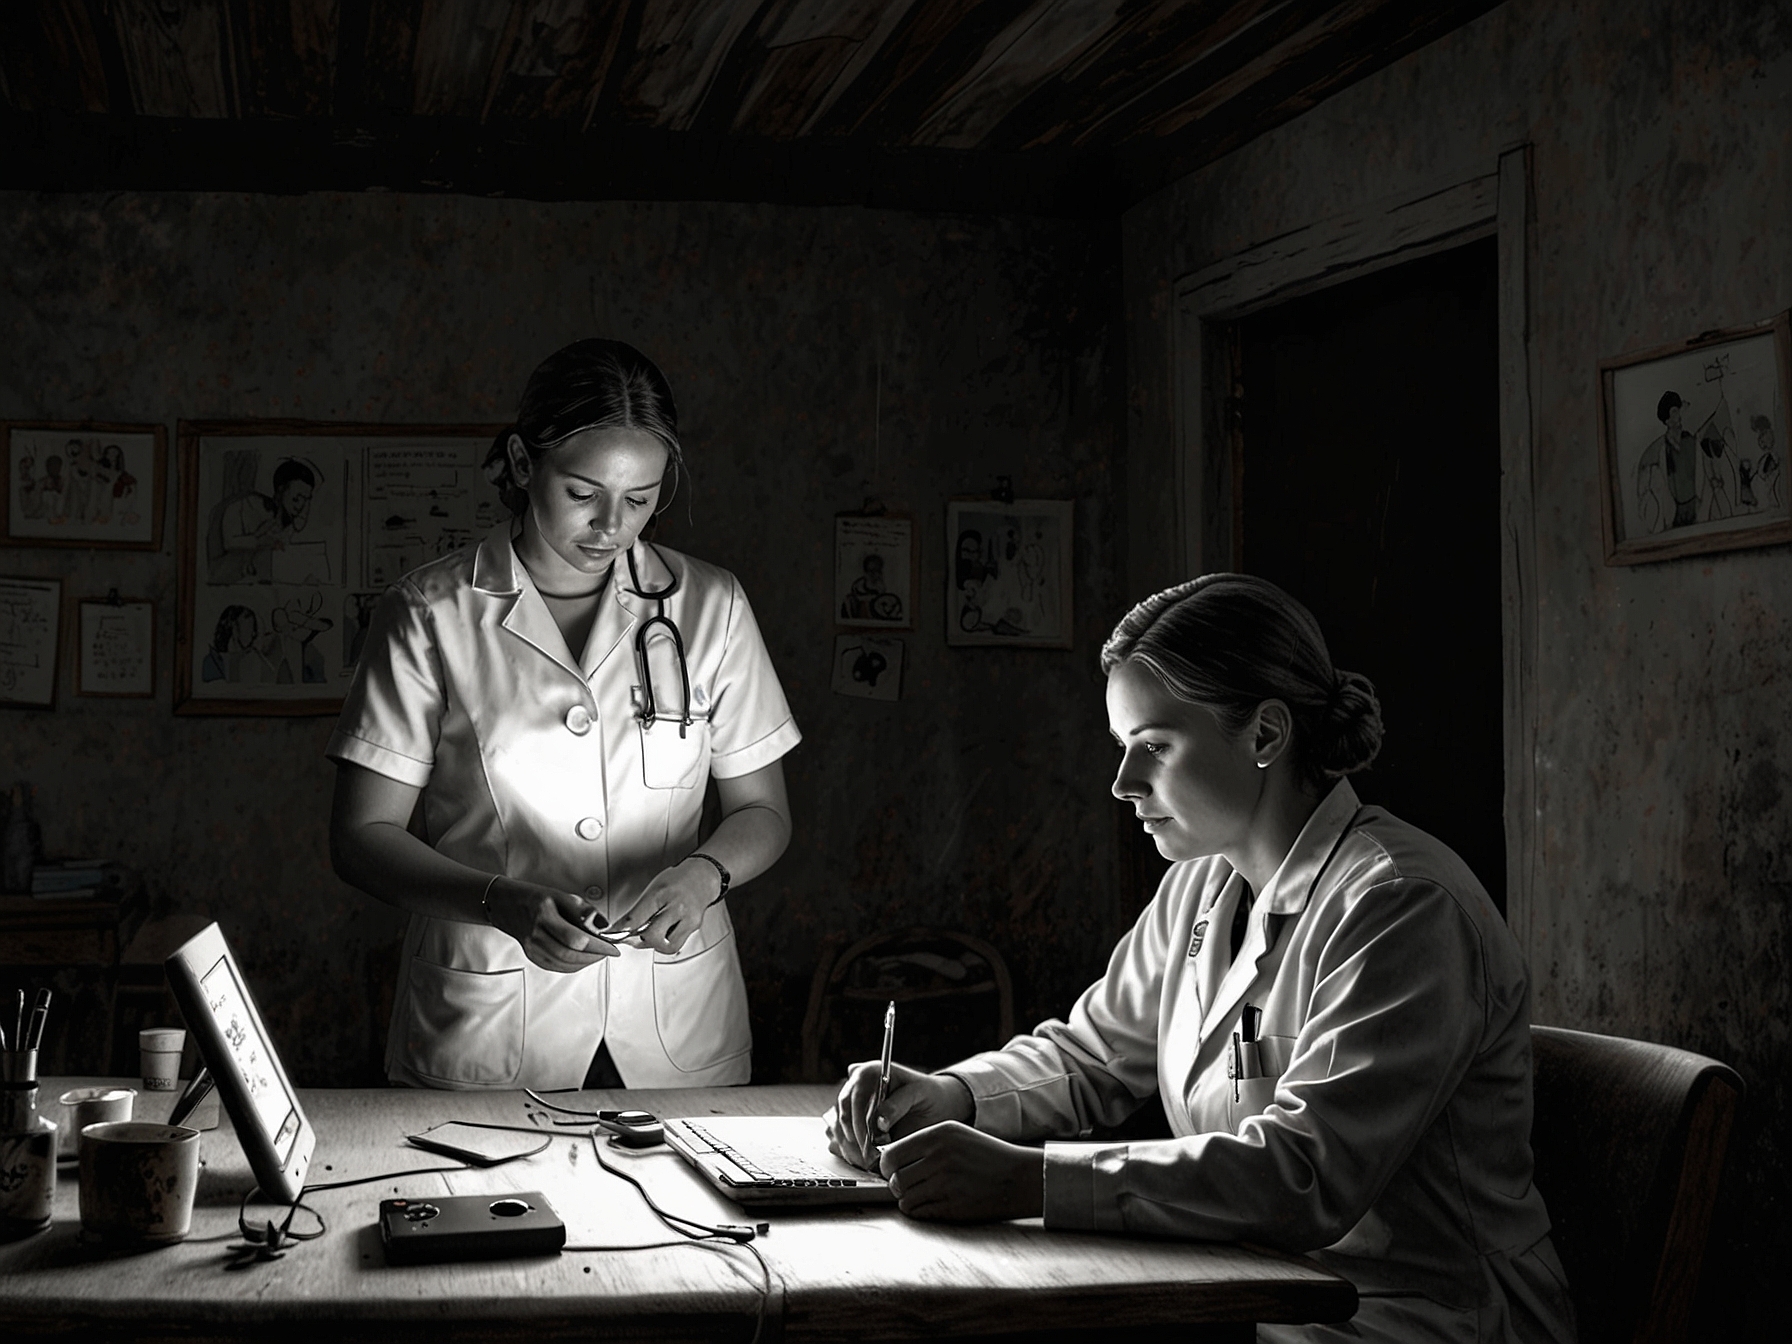 A healthcare worker using telemedicine technology to diagnose and treat a patient in a remote village, highlighting NHM's technological integration in bridging healthcare access.